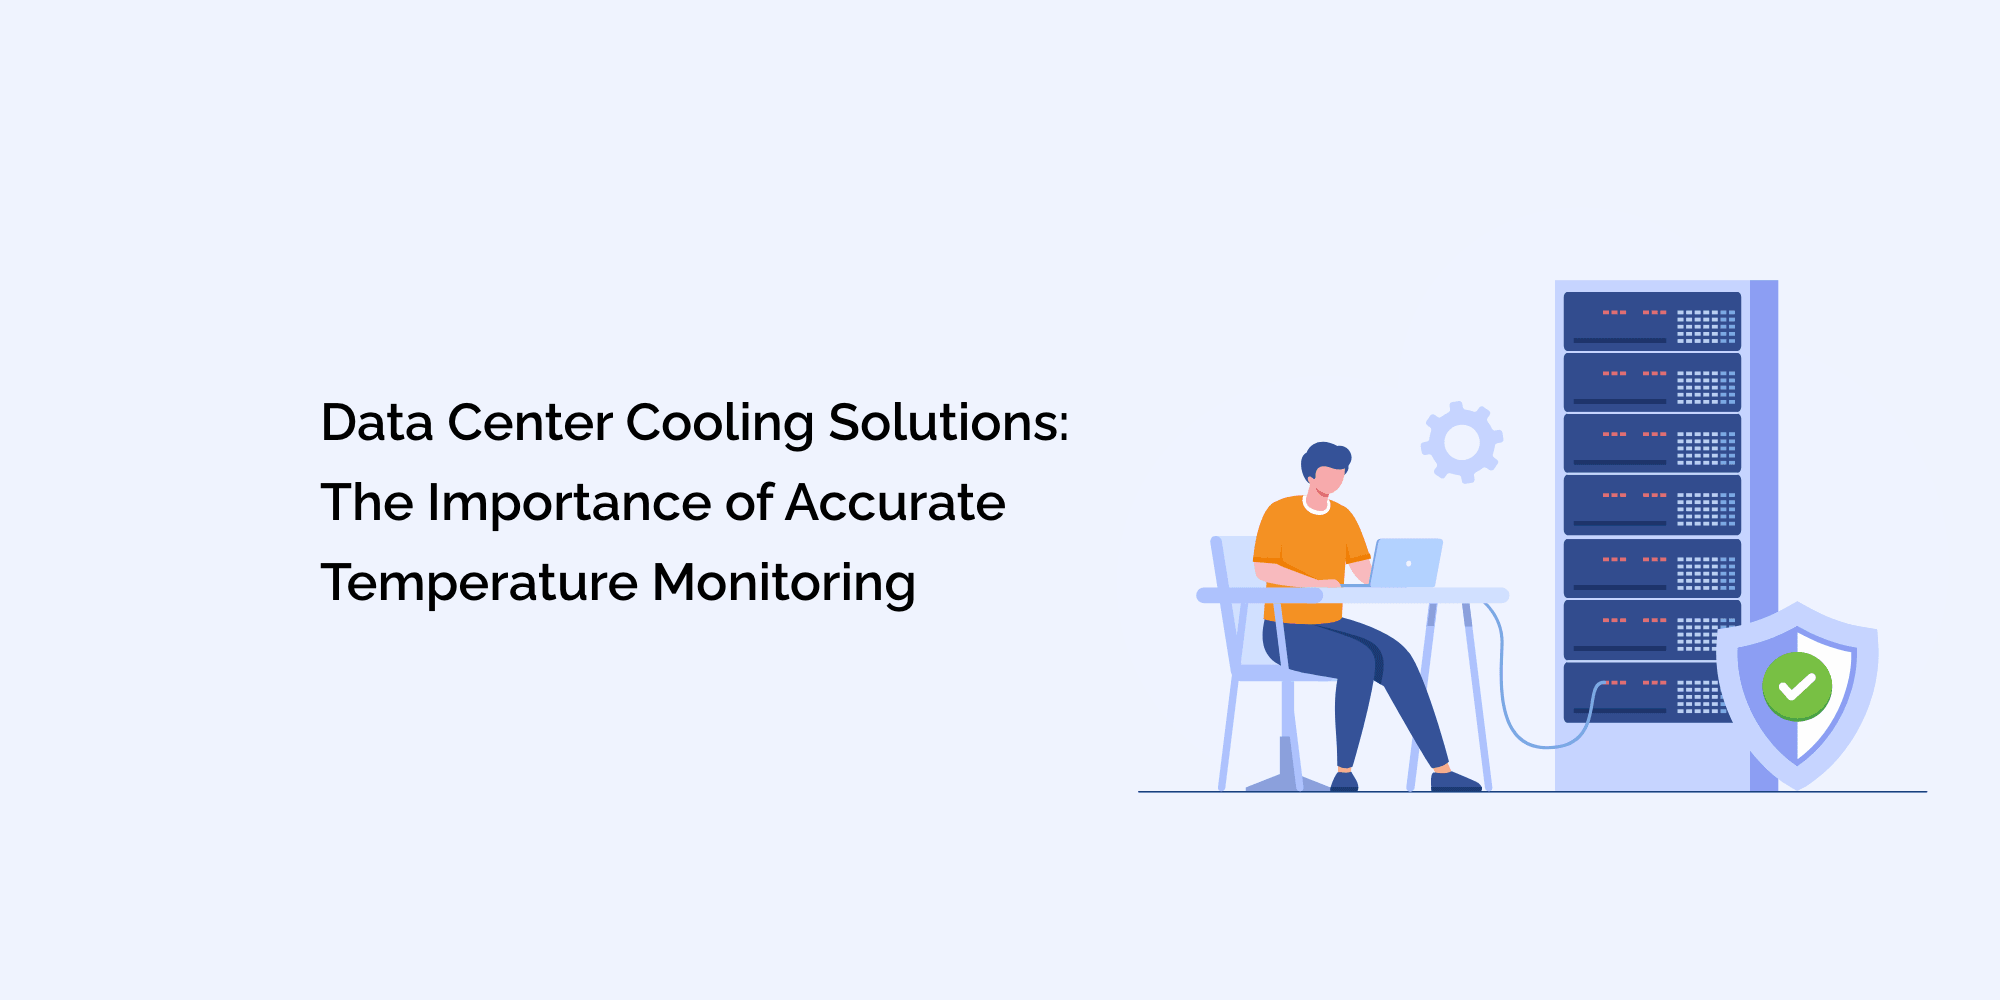 Data Center Cooling Solutions: The Importance of Accurate Temperature Monitoring